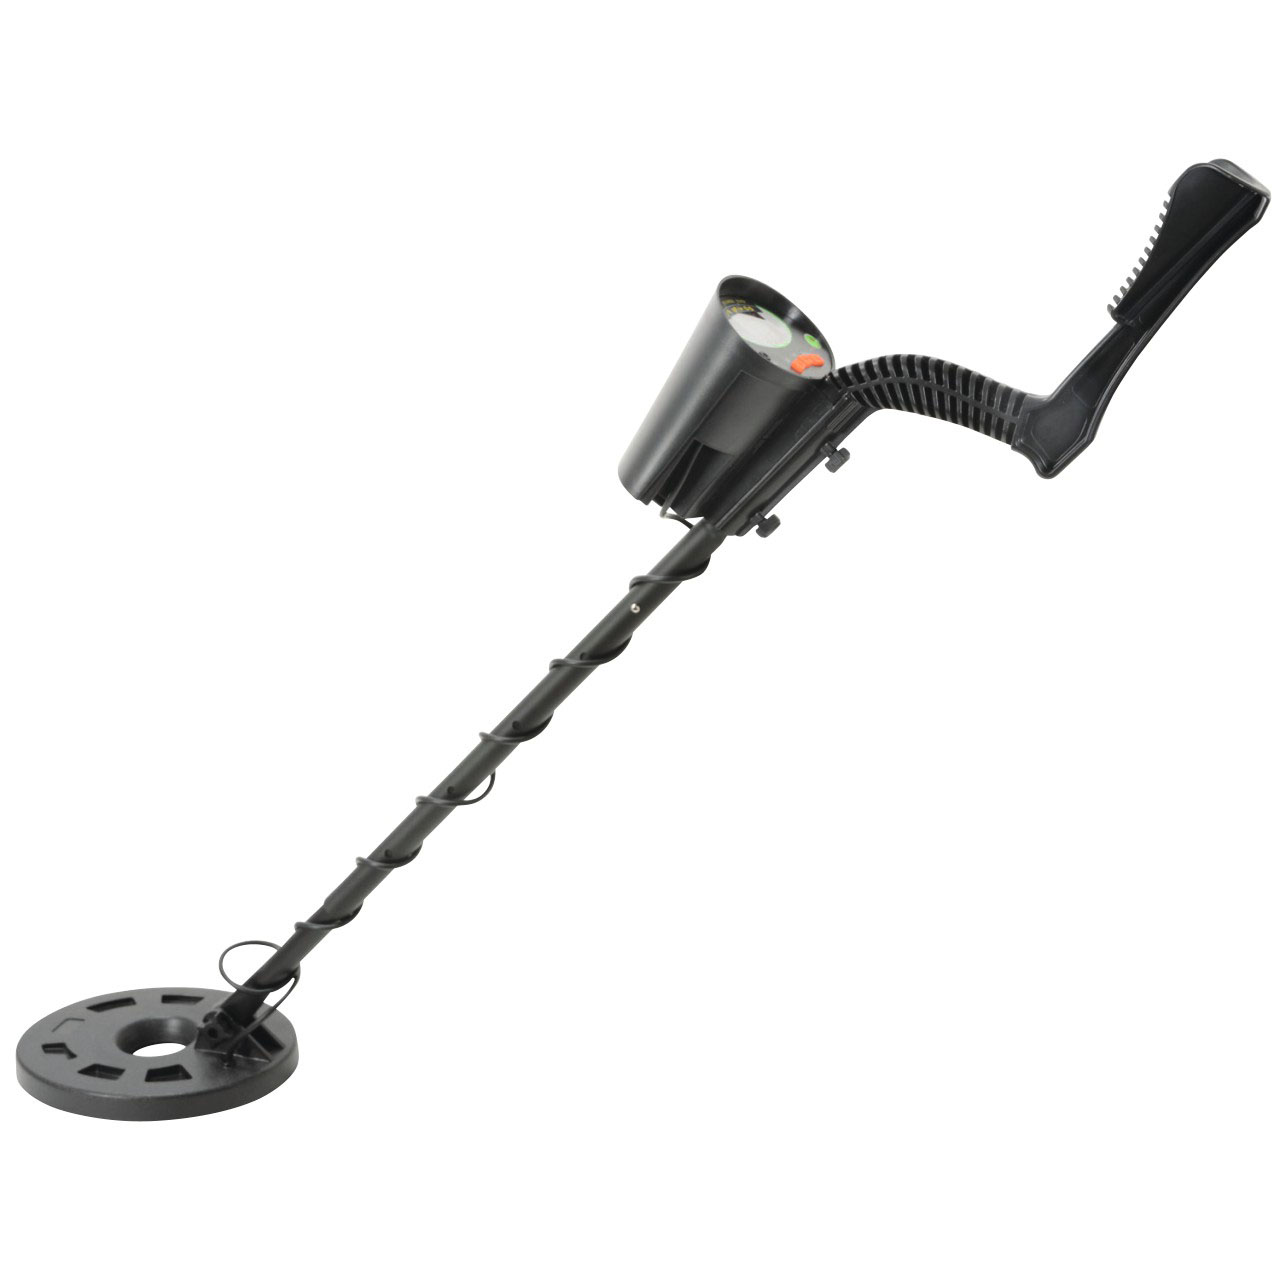 Advanced Metal Detector With LCD Display